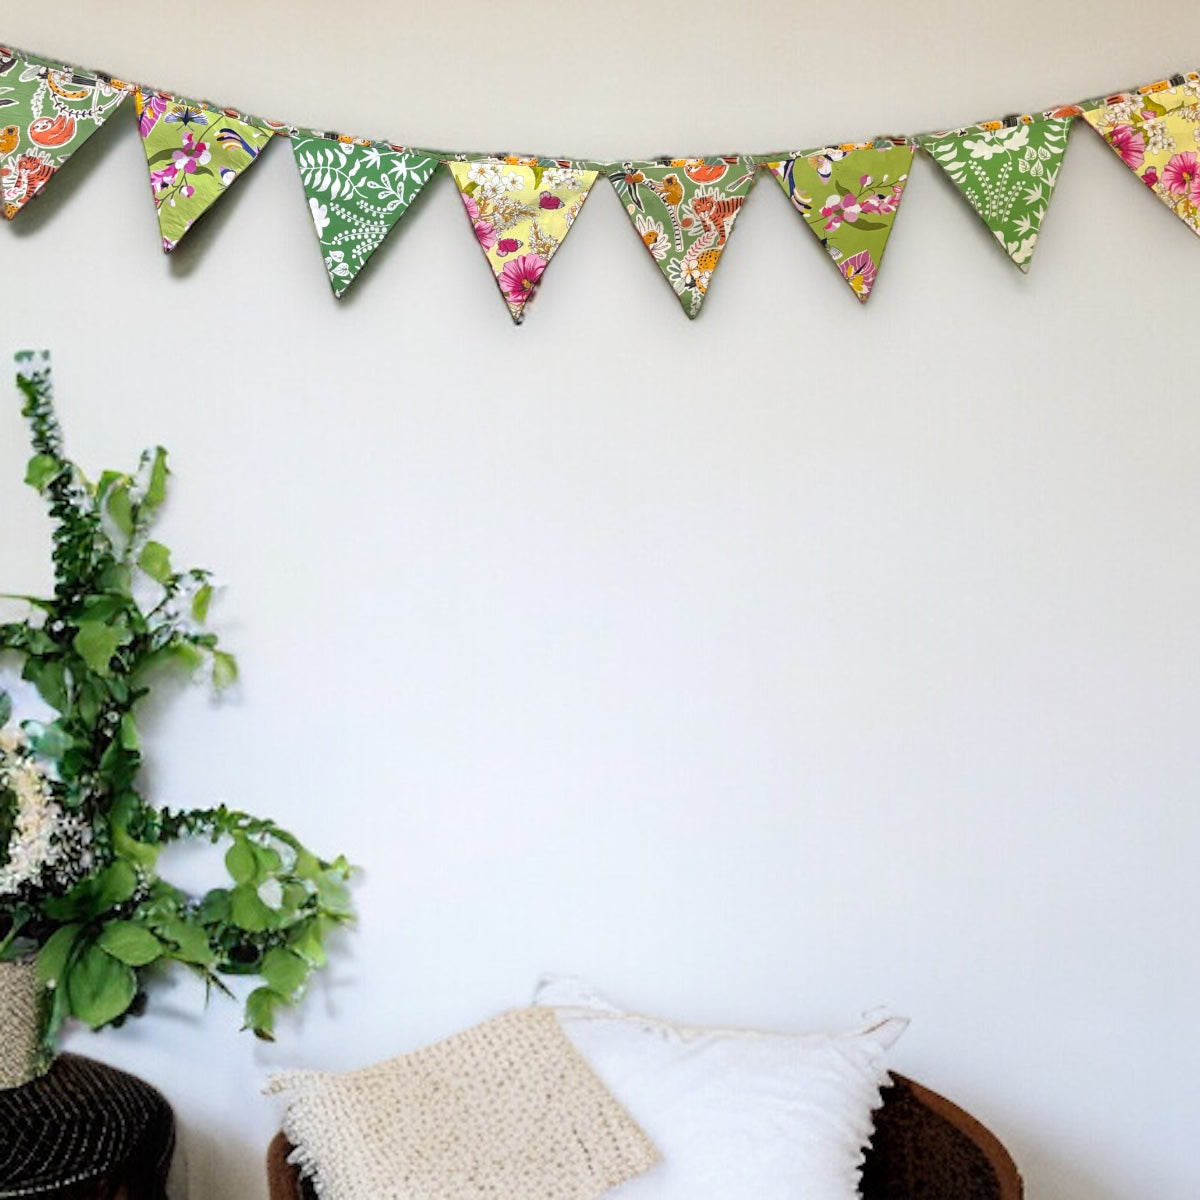 Upcycled Party Green Streamer Combo - Green Banner Bunting + Green Fringe Streamer Garland (Pack of 2)